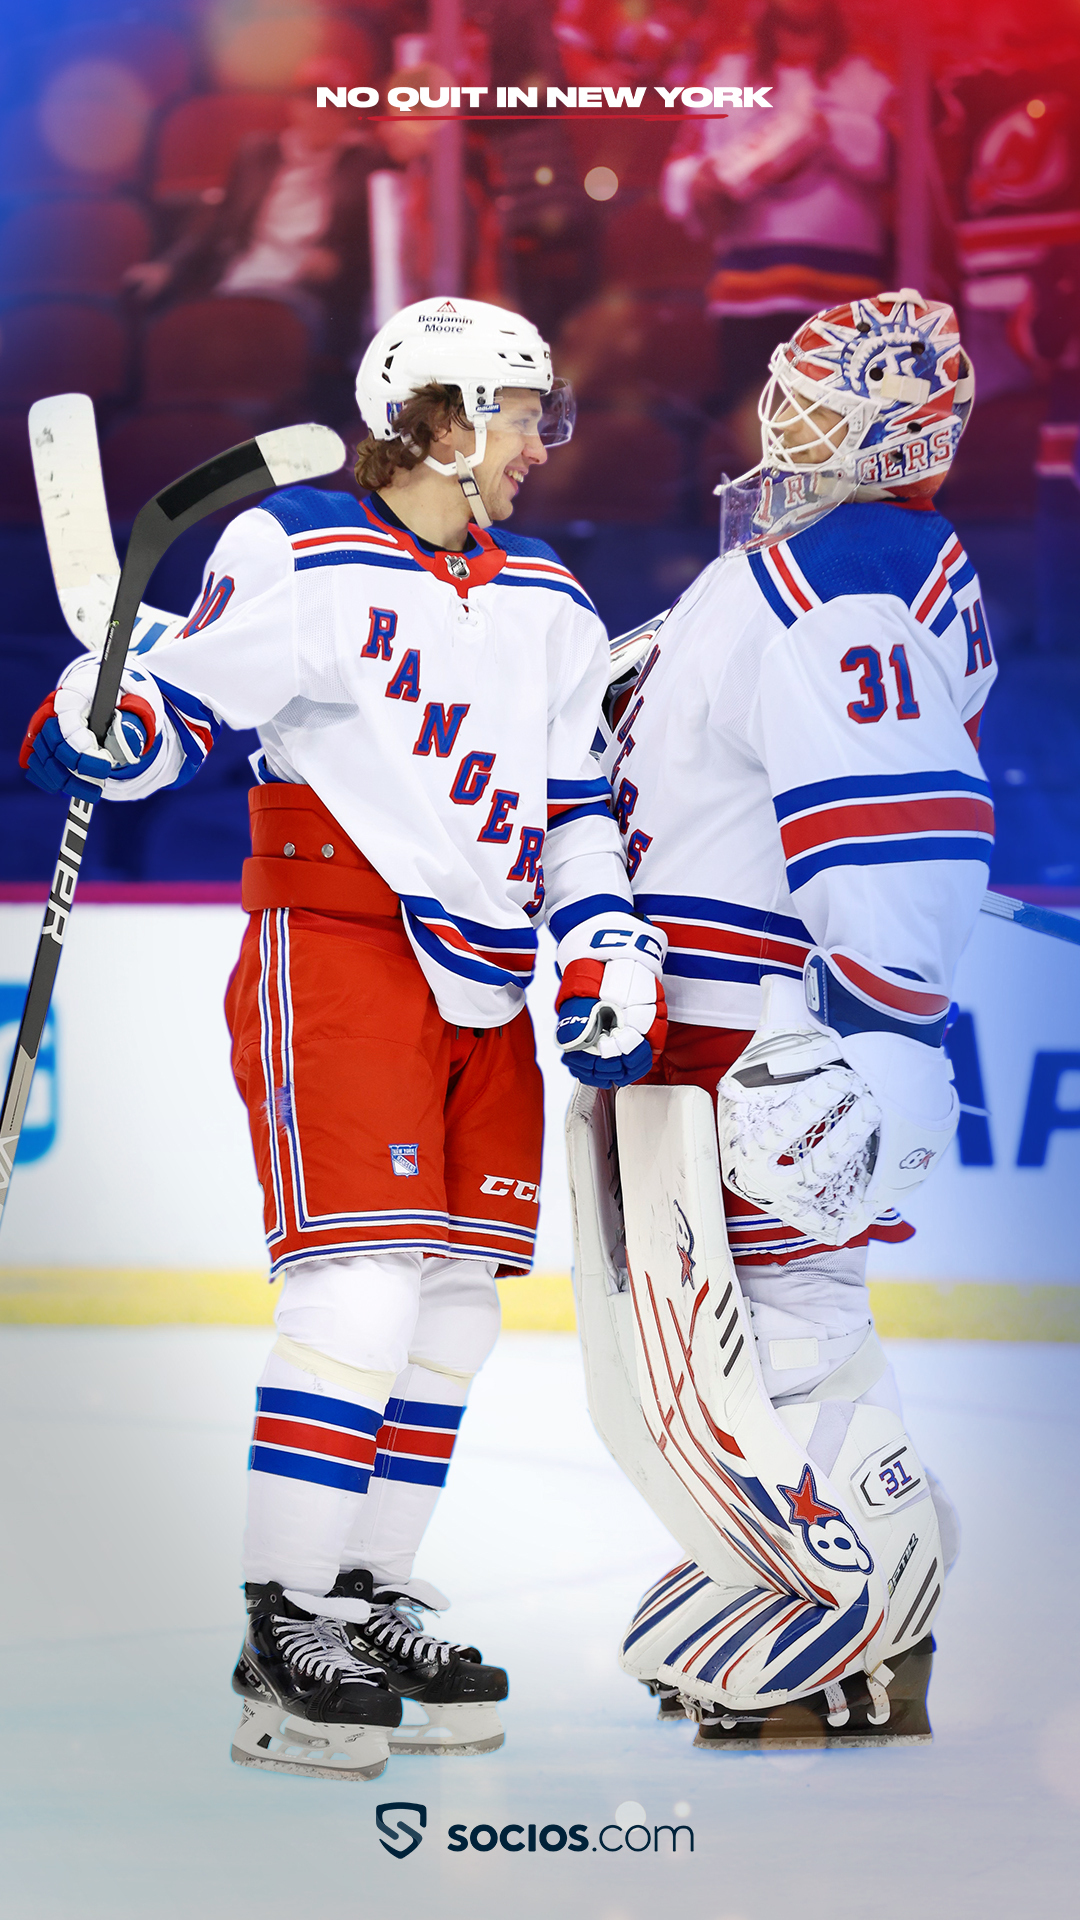 Just in case your lock screen needs an - New York Rangers